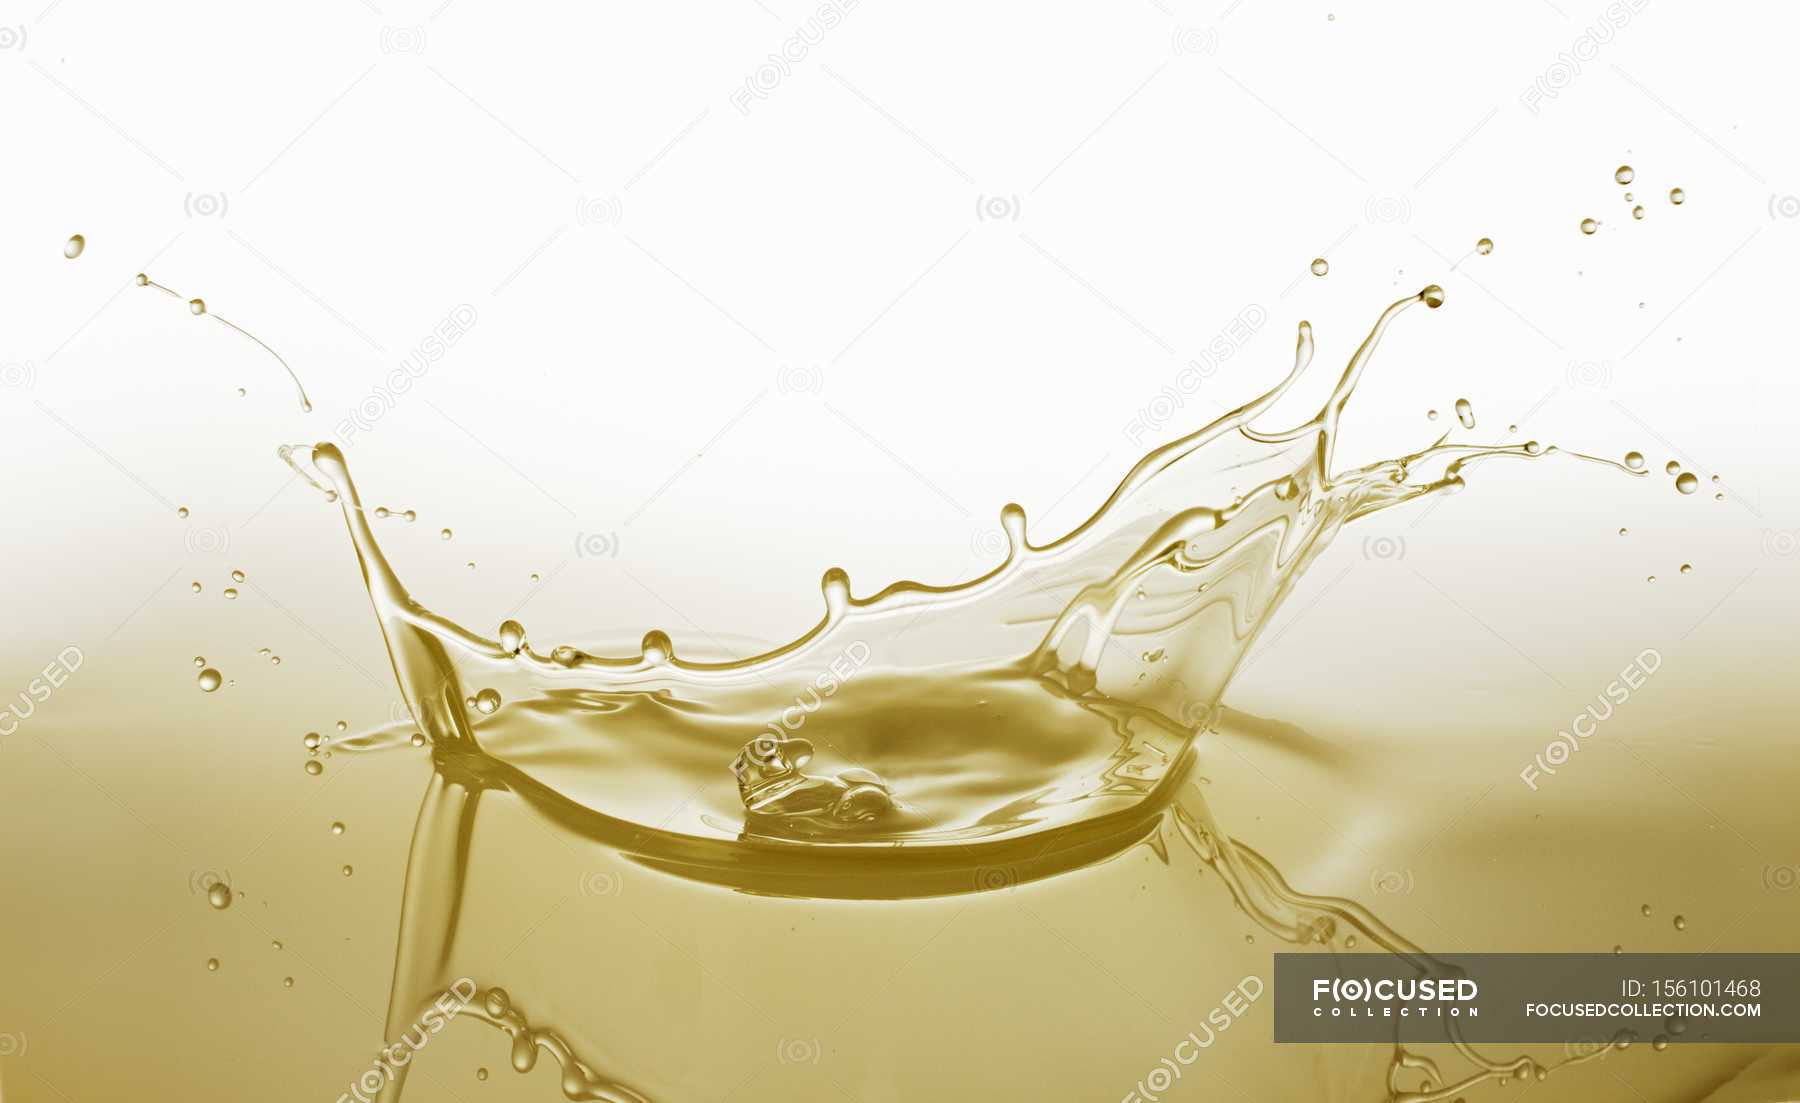 Download Closeup View Of A Splash Of Yellow Oil Drinkable Calories Stock Photo 156101468 PSD Mockup Templates